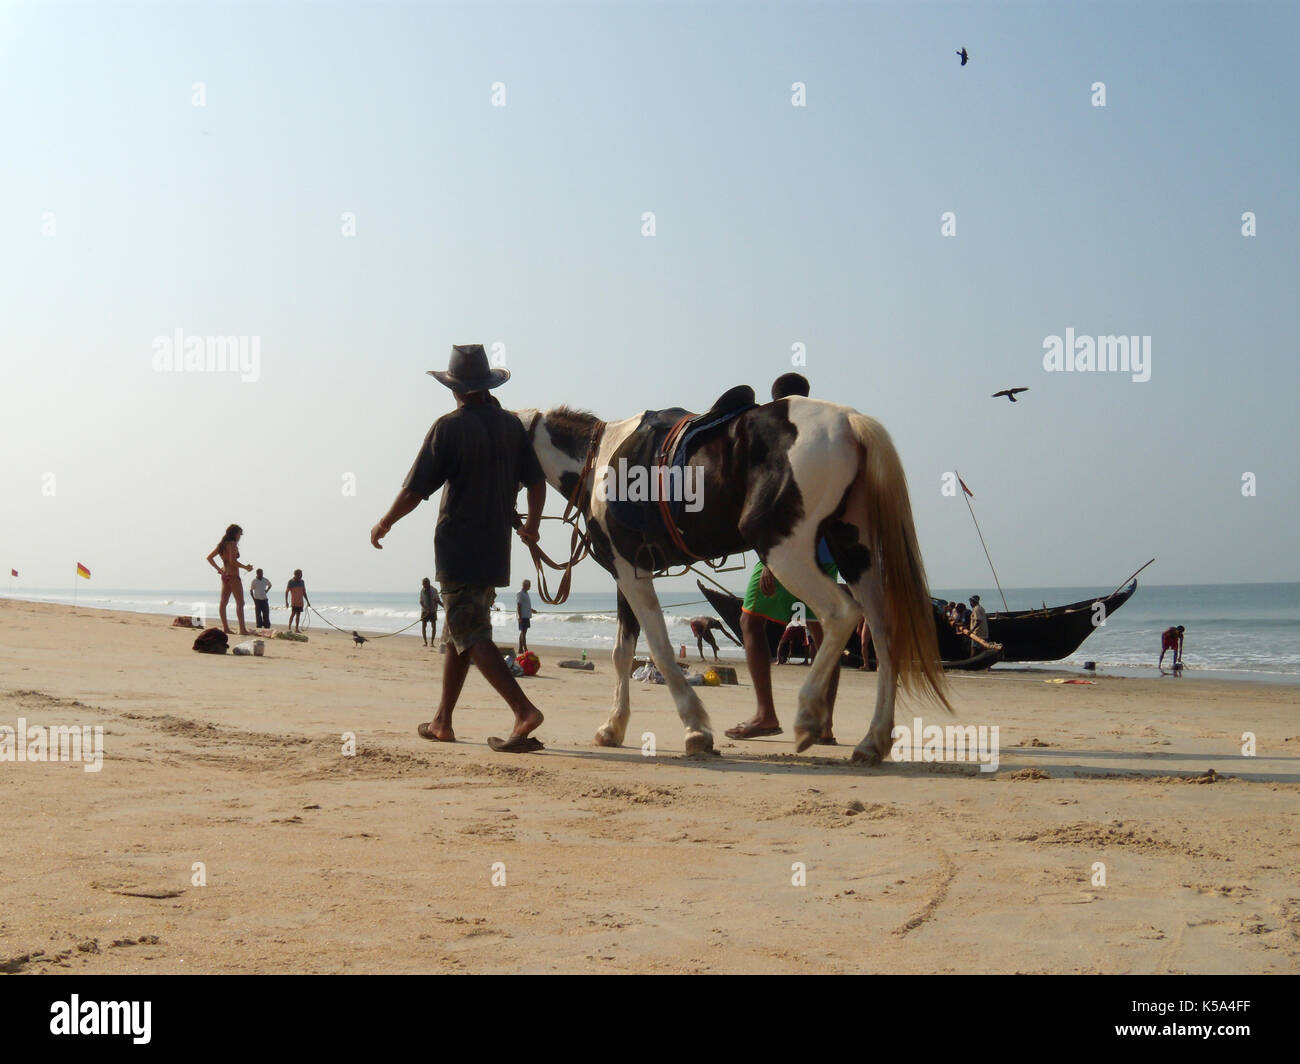 Scene at Goa beach, India. Walking cowboy with the horse and fishermen who  just docked on the boat to the ocean shore. Stock Photo